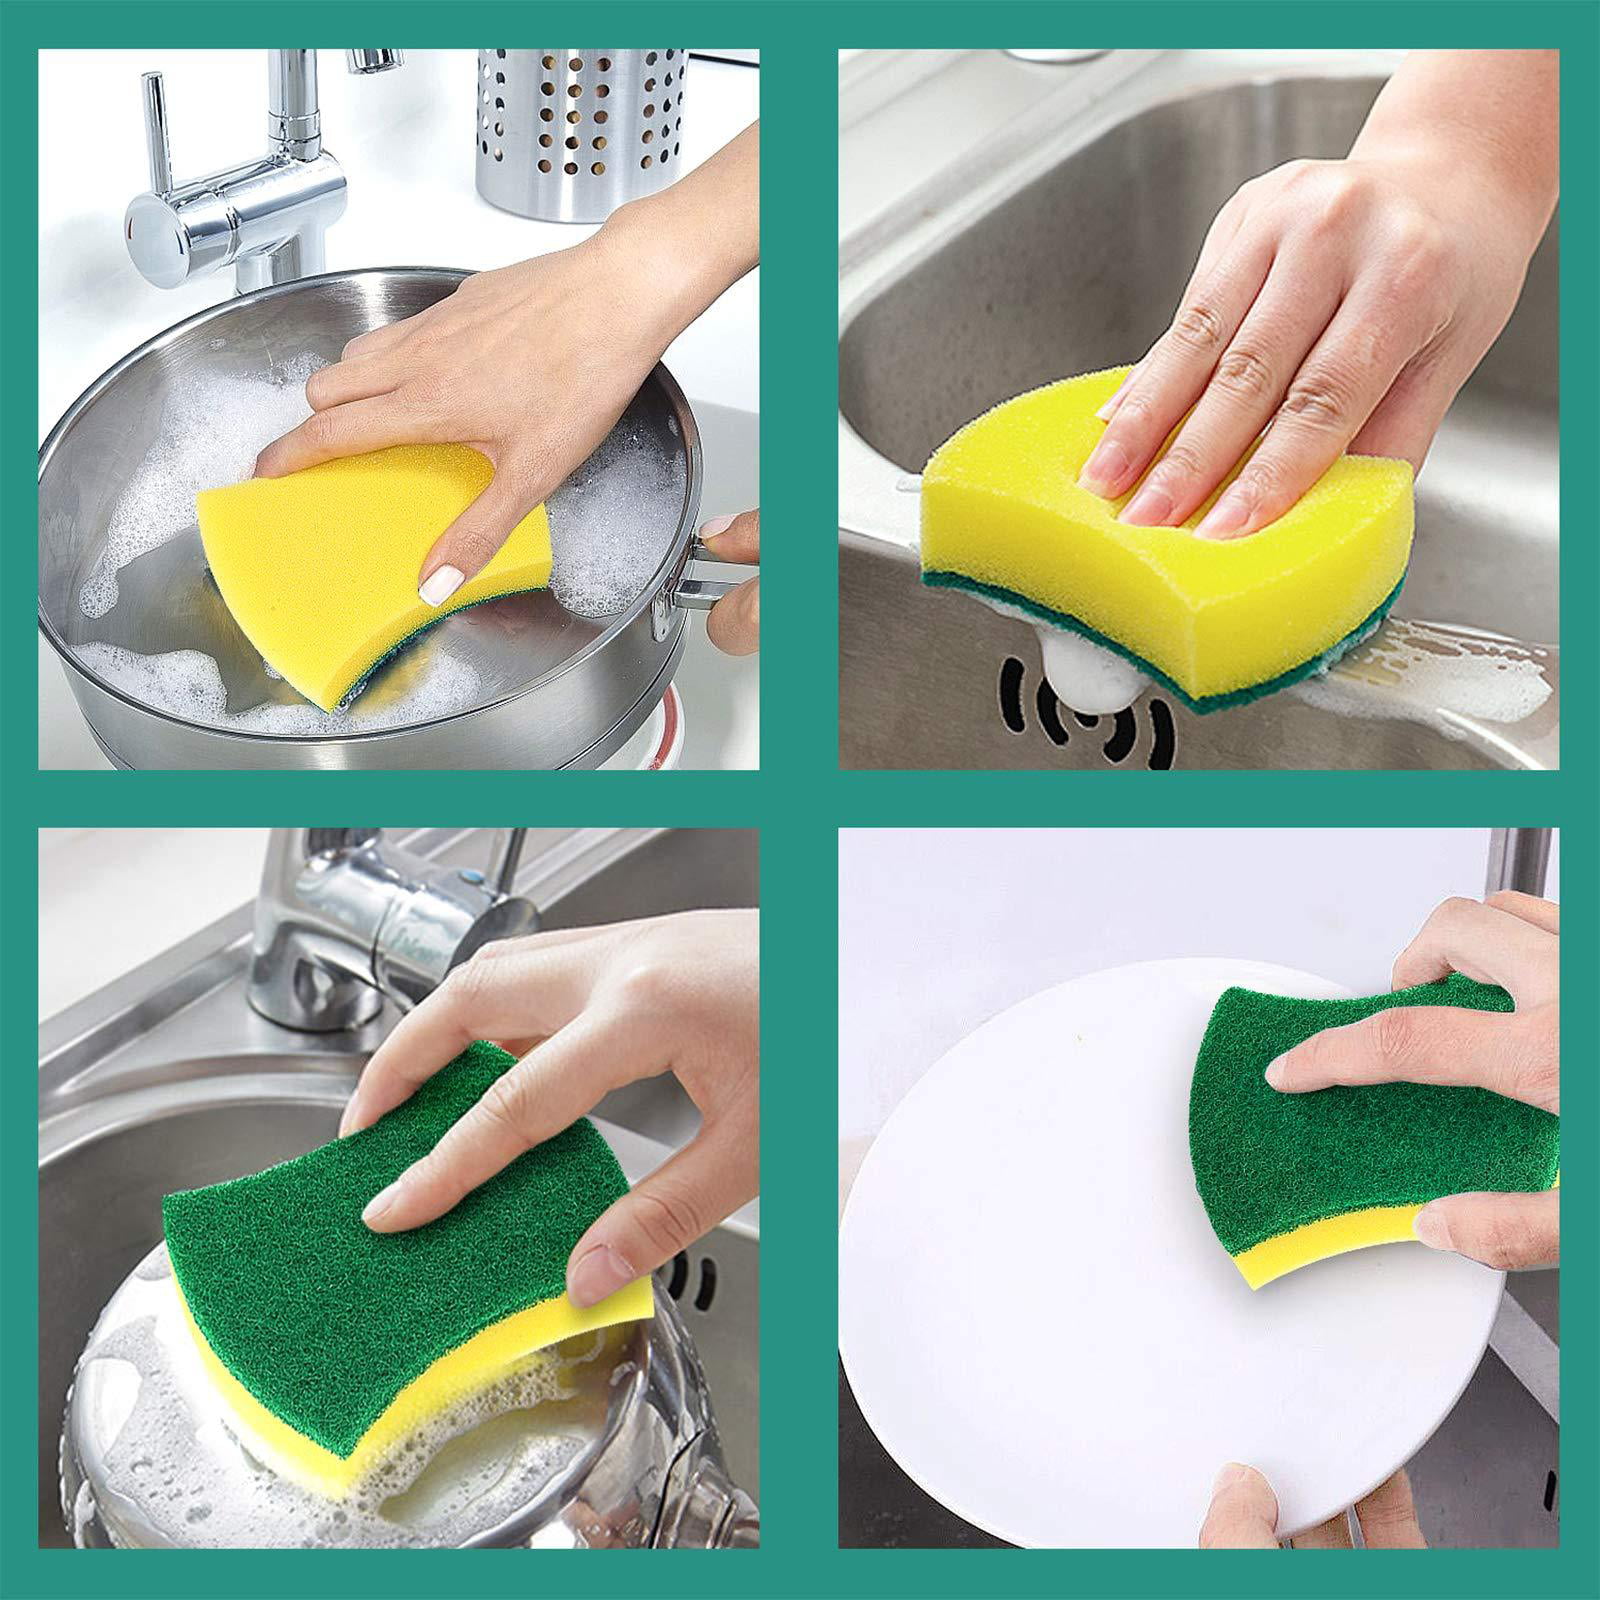 1pc Natural Sponges Non Scratch Scrub Sponge For Kitchen Biodegradable  Plant Based Scrubber Sponges For Cleaning Dishes Odor Free Yellow, 24/7  Customer Service